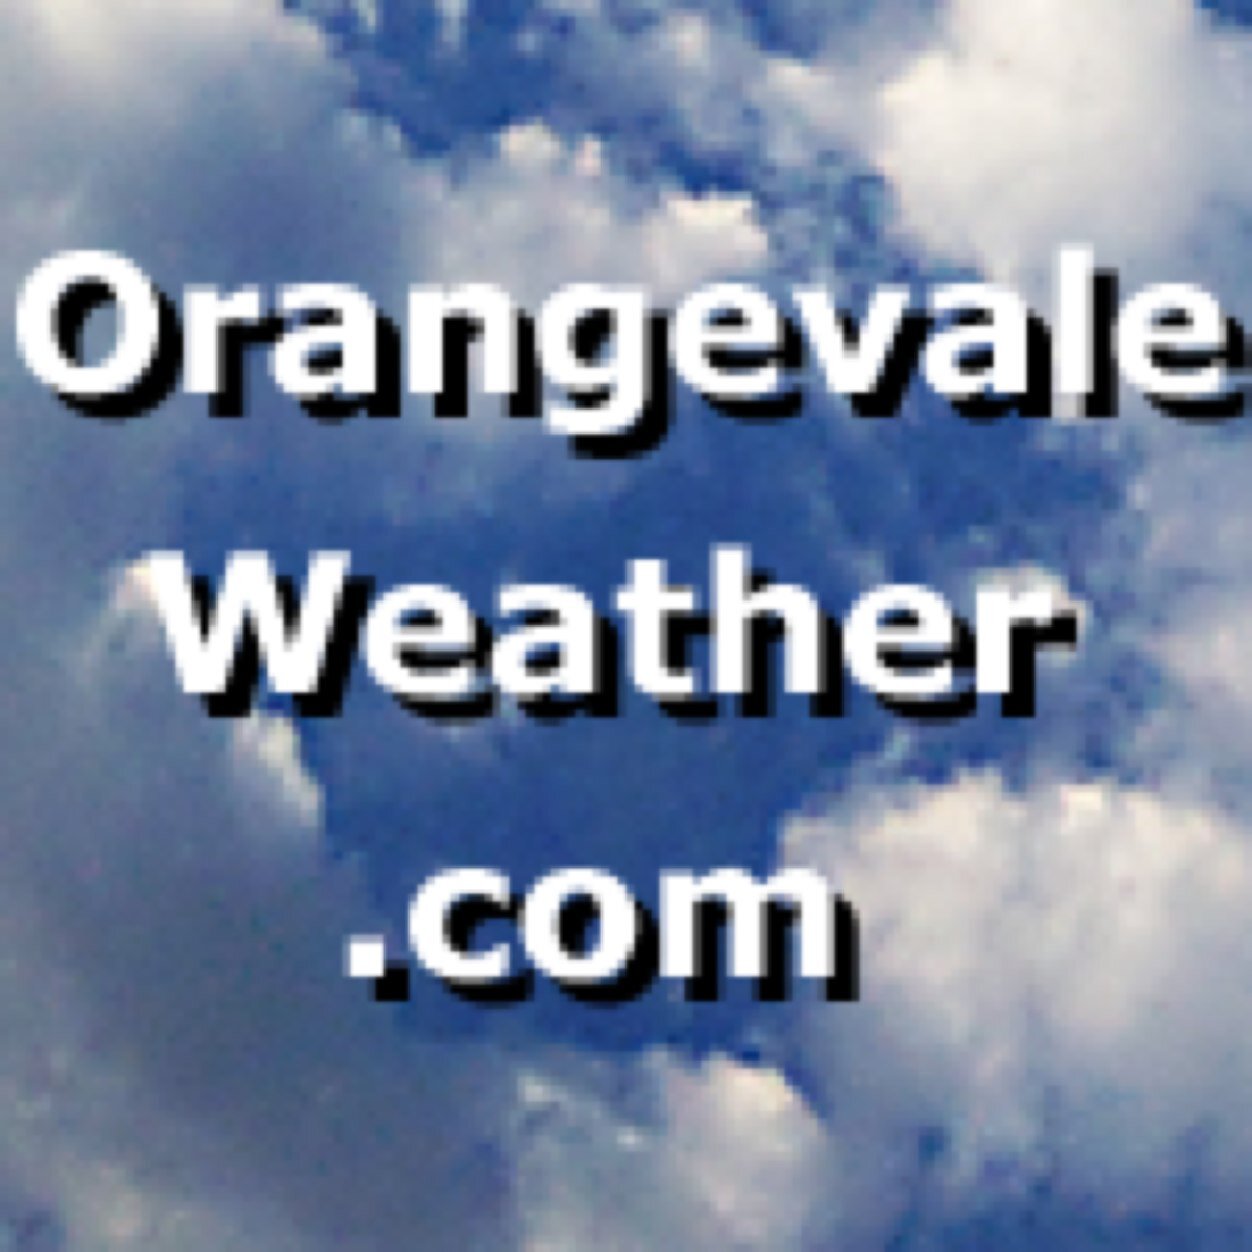 Weather information specific to Orangevale, CA, as well as the greater Sacramento area and northern CA.